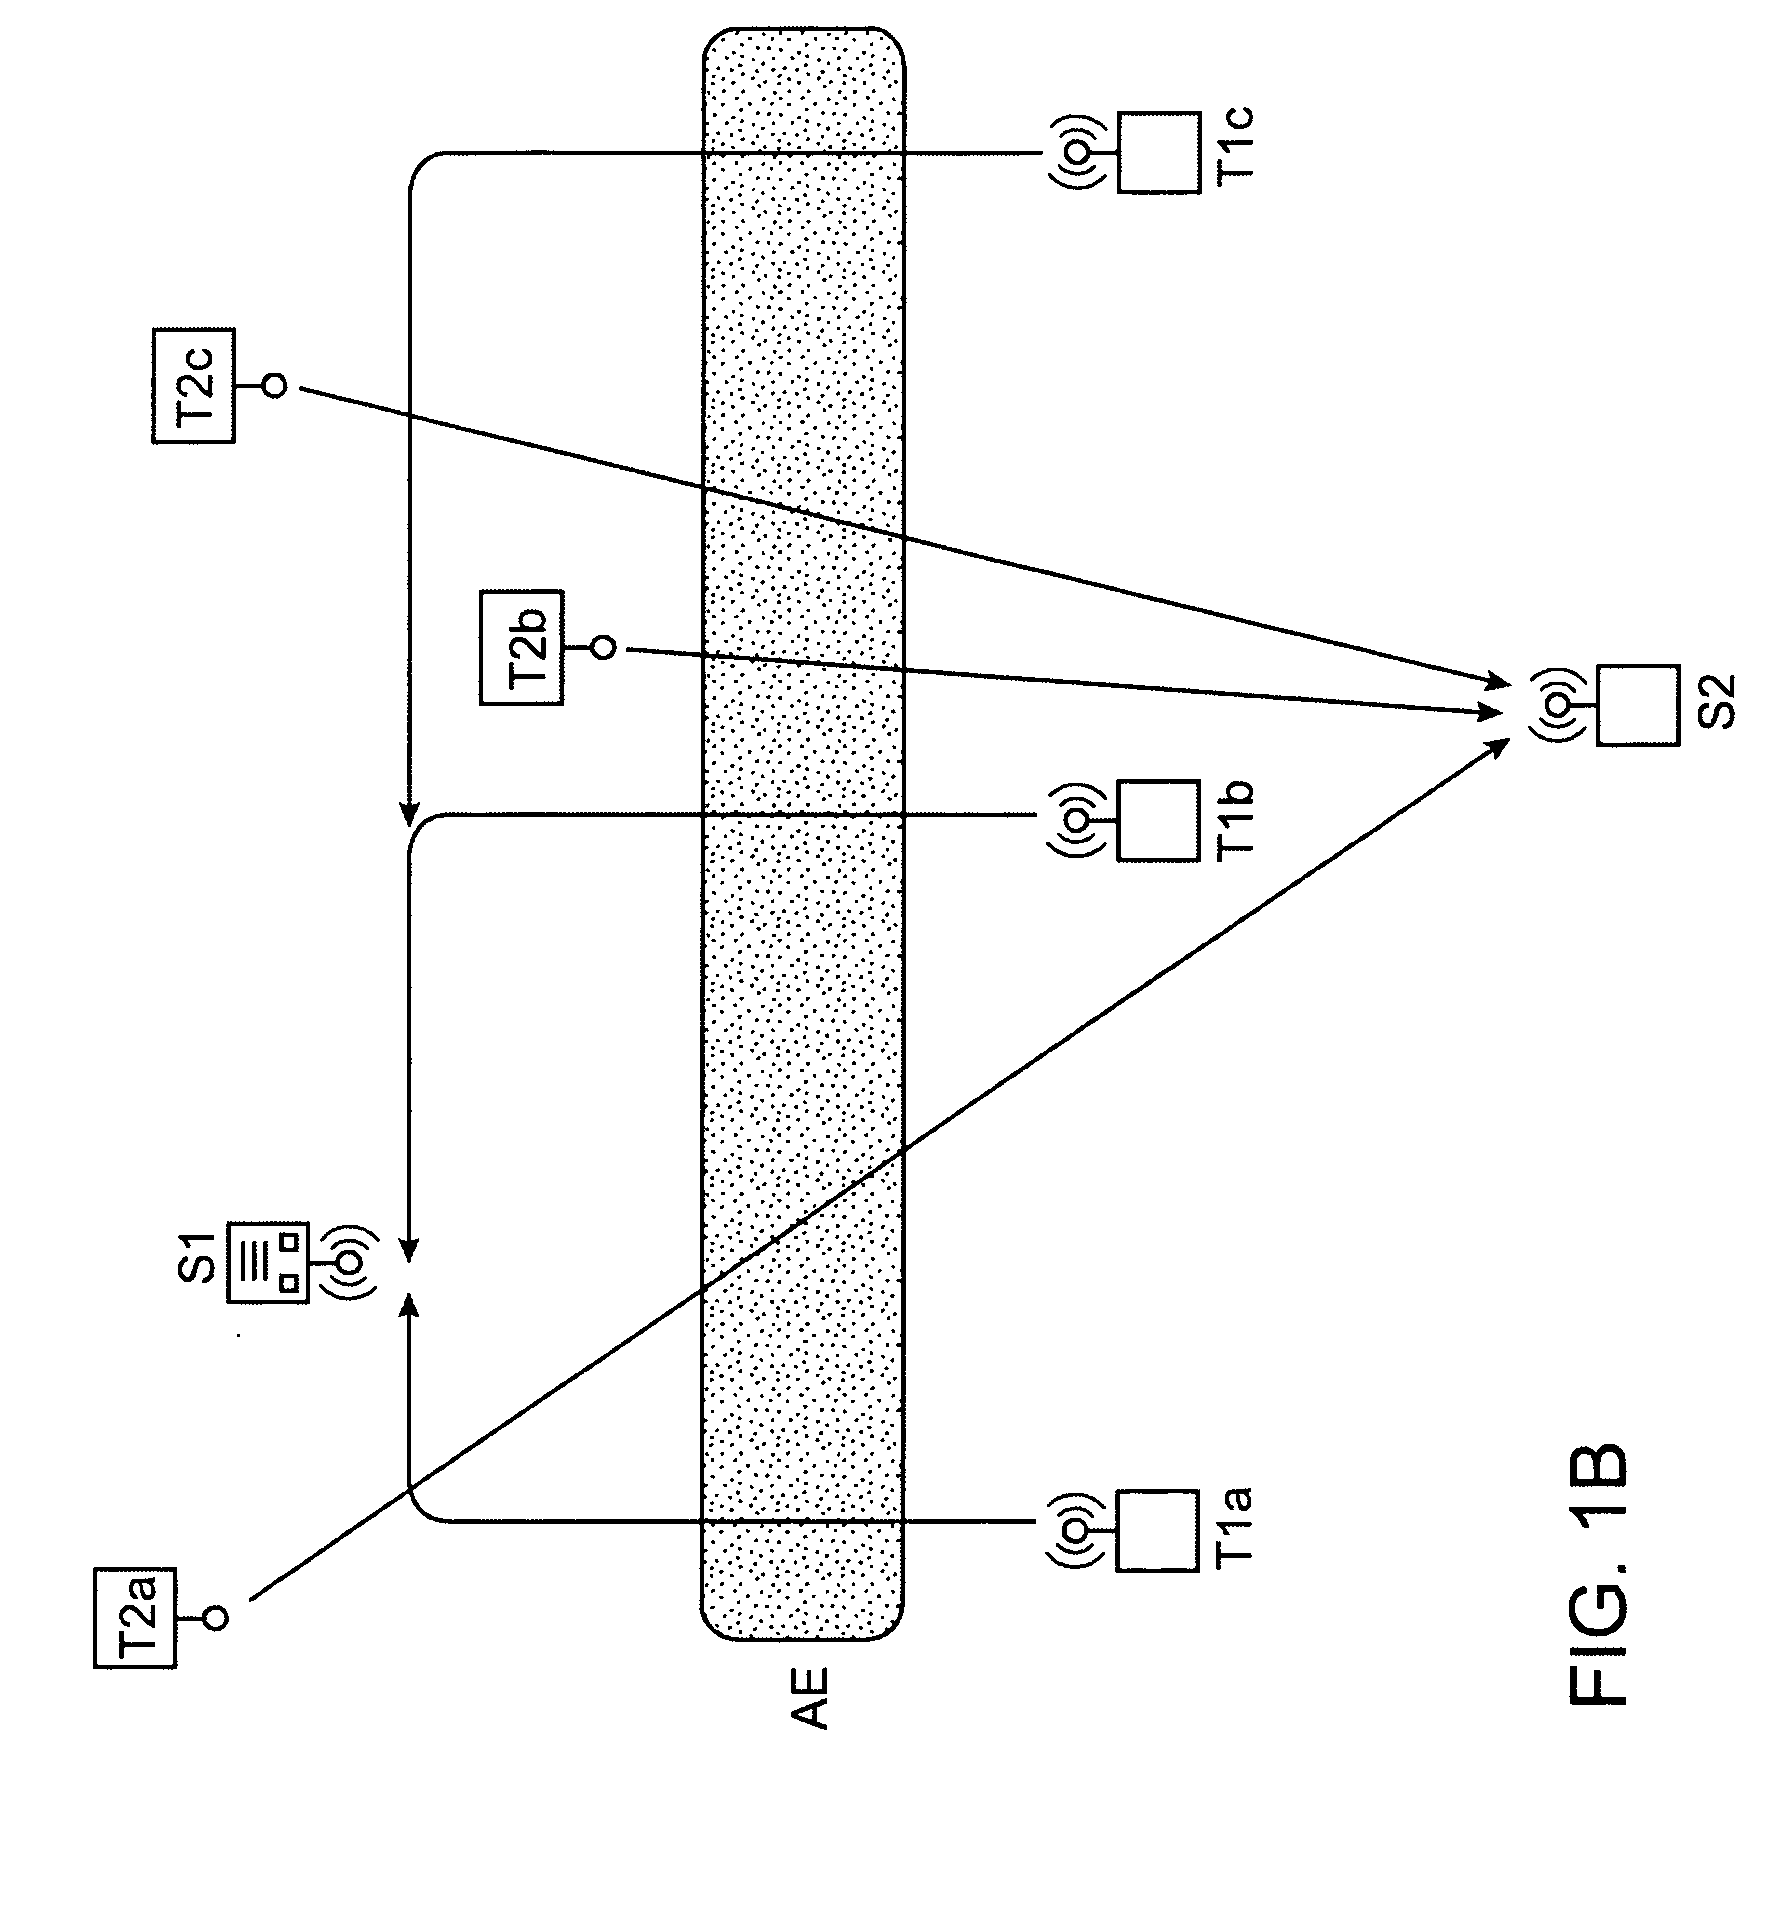 Mobile child monitoring system and methods of use